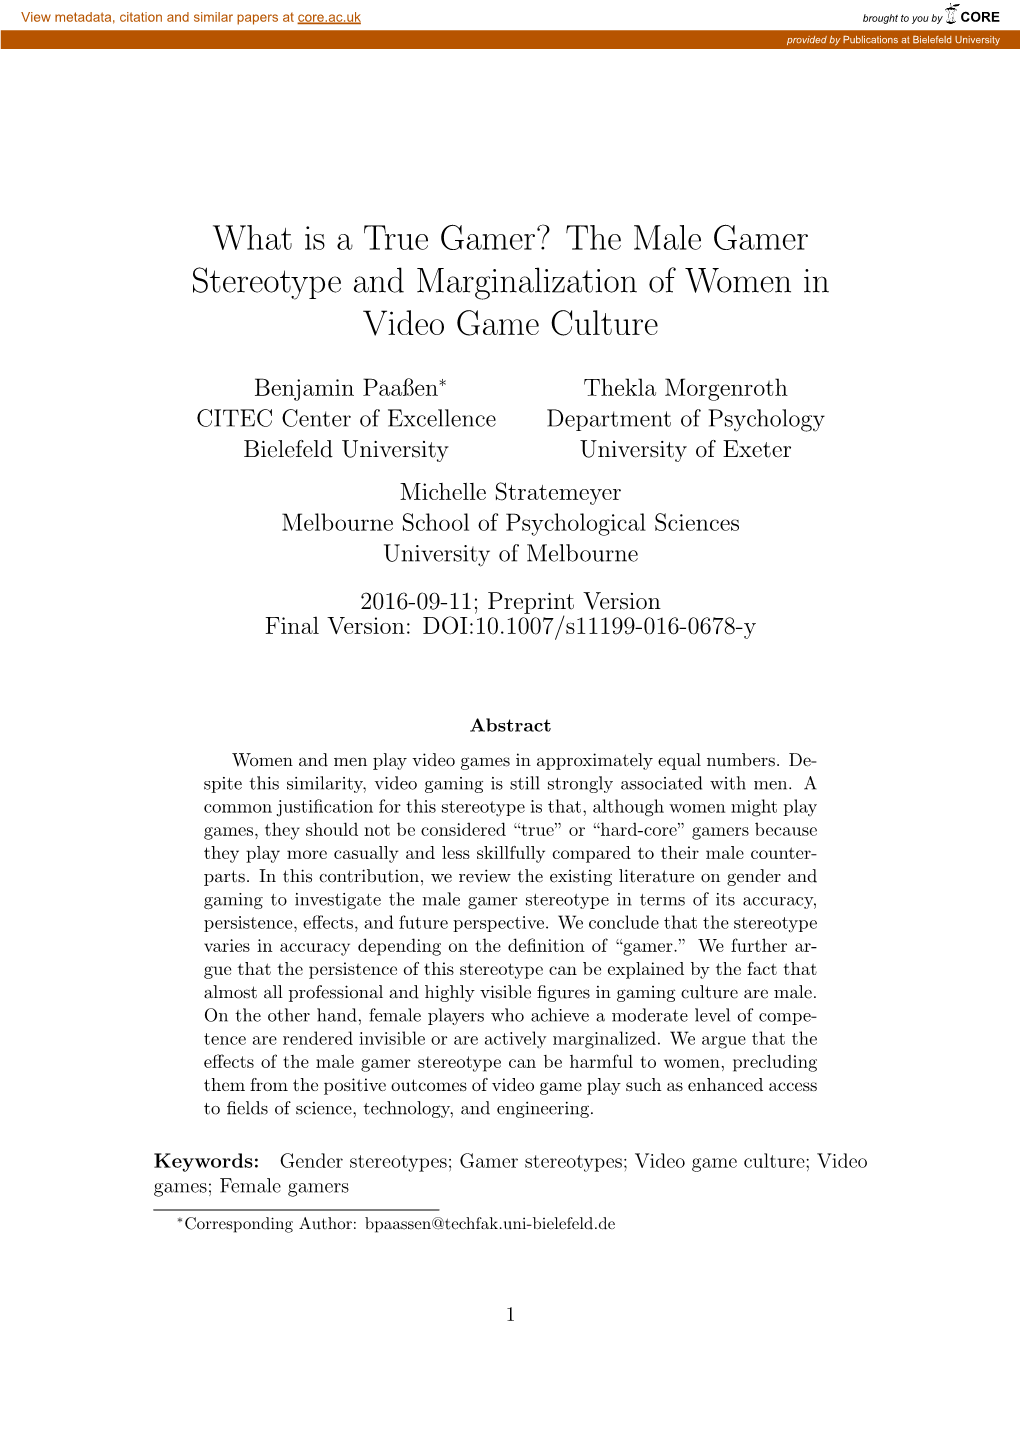 The Male Gamer Stereotype and Marginalization of Women in Video Game Culture